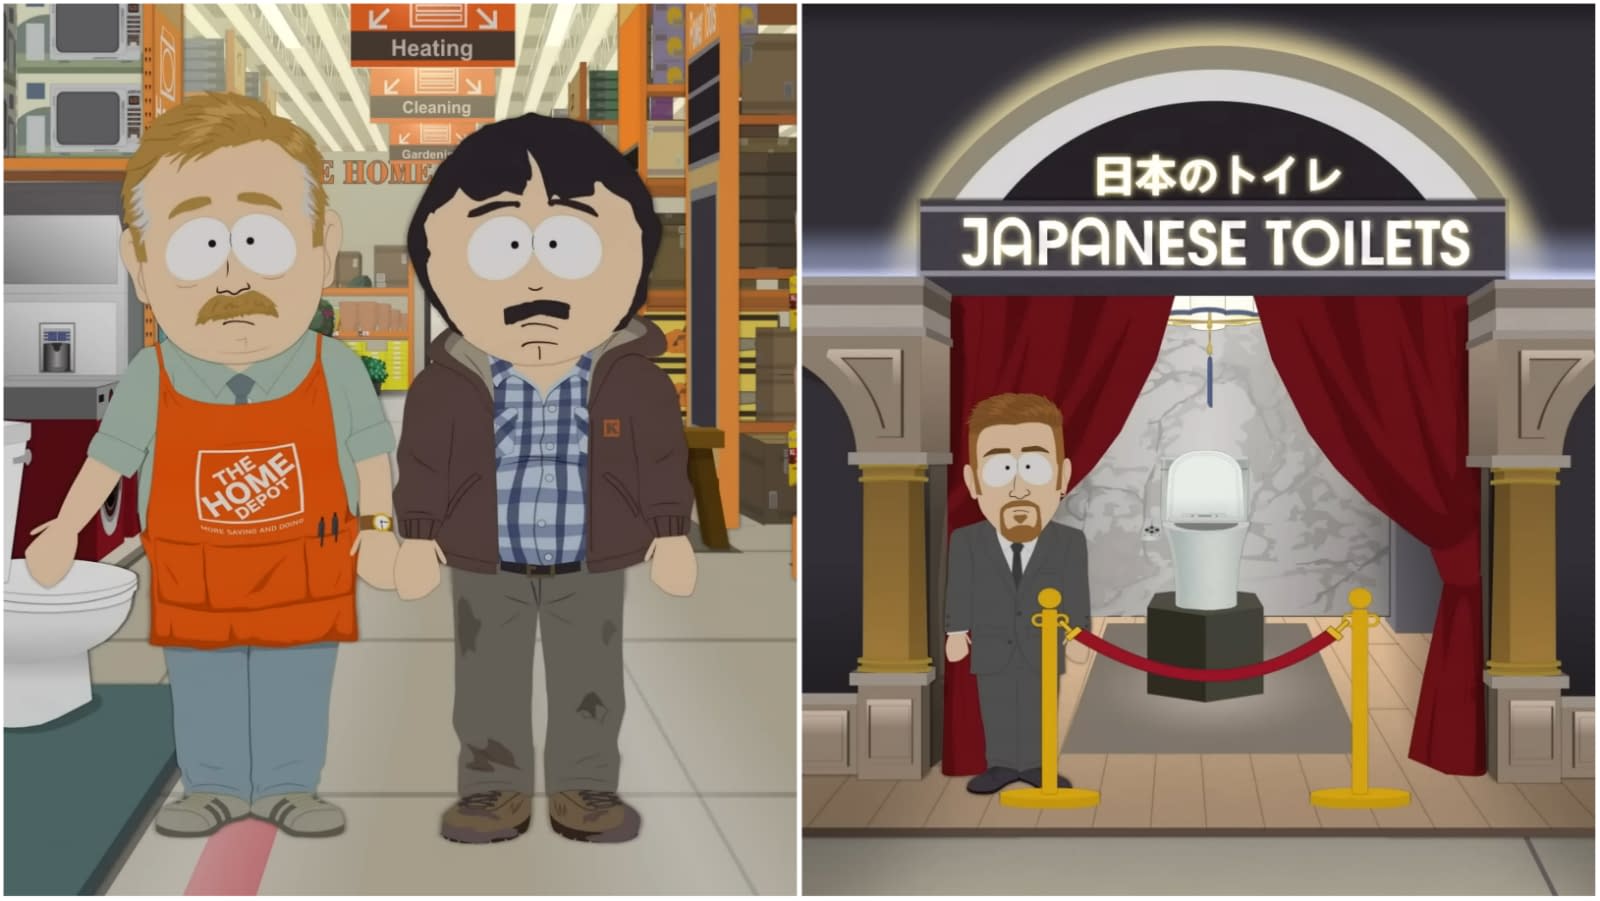 South Park Season 26 Ep. 3 Randy's New Obsession? Japanese Toilets